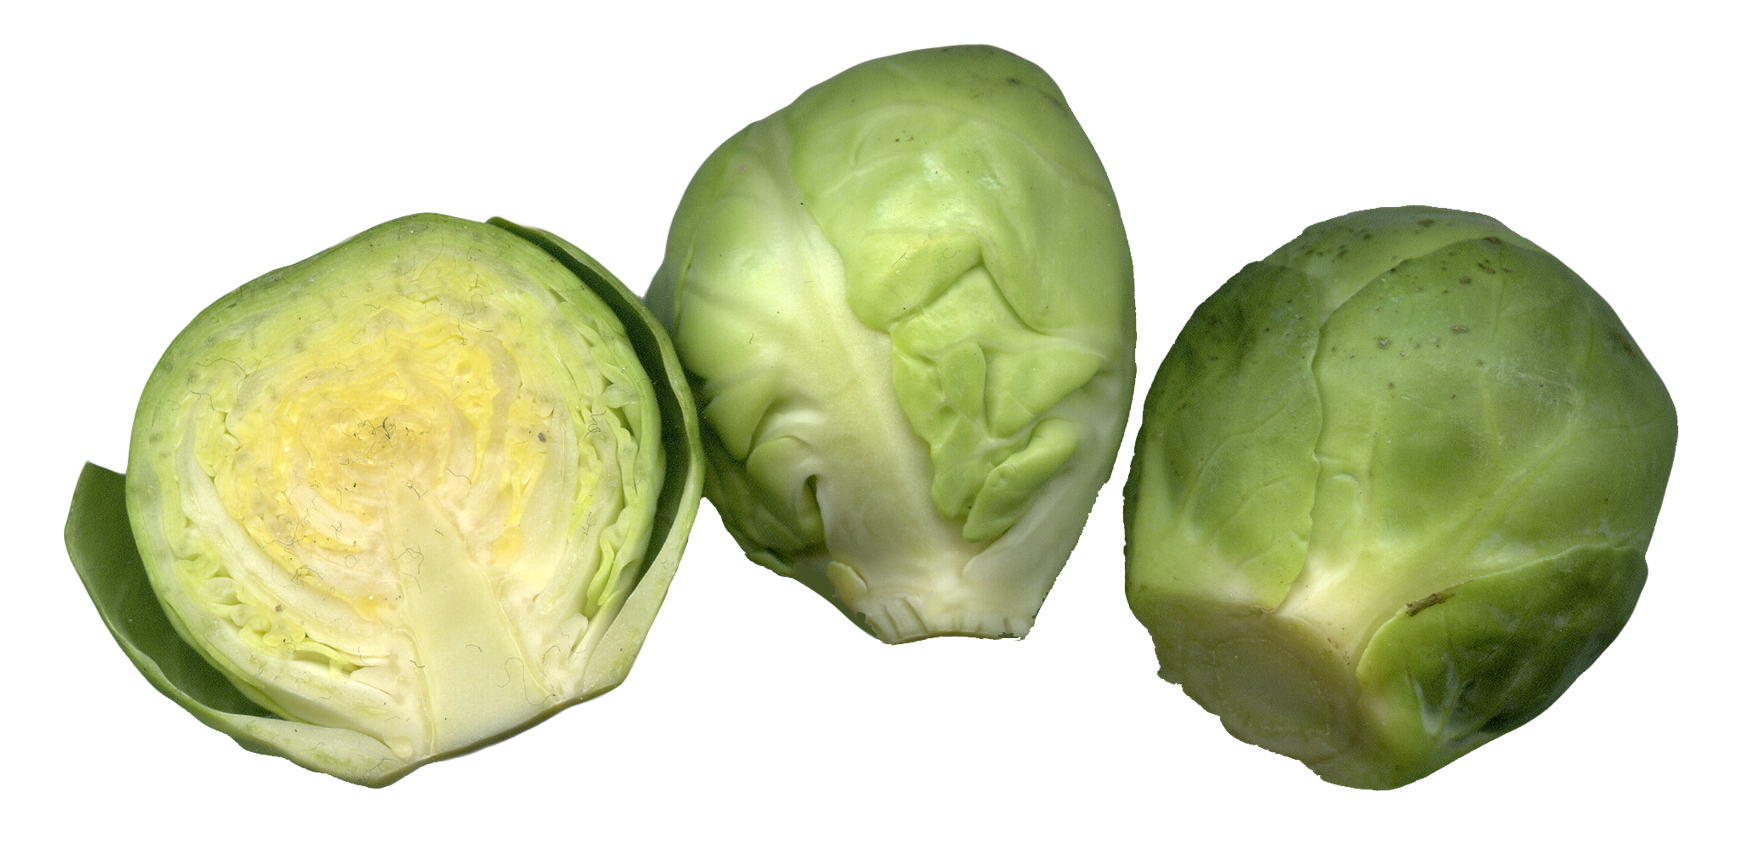 A Group Of Cabbages Cut In Half